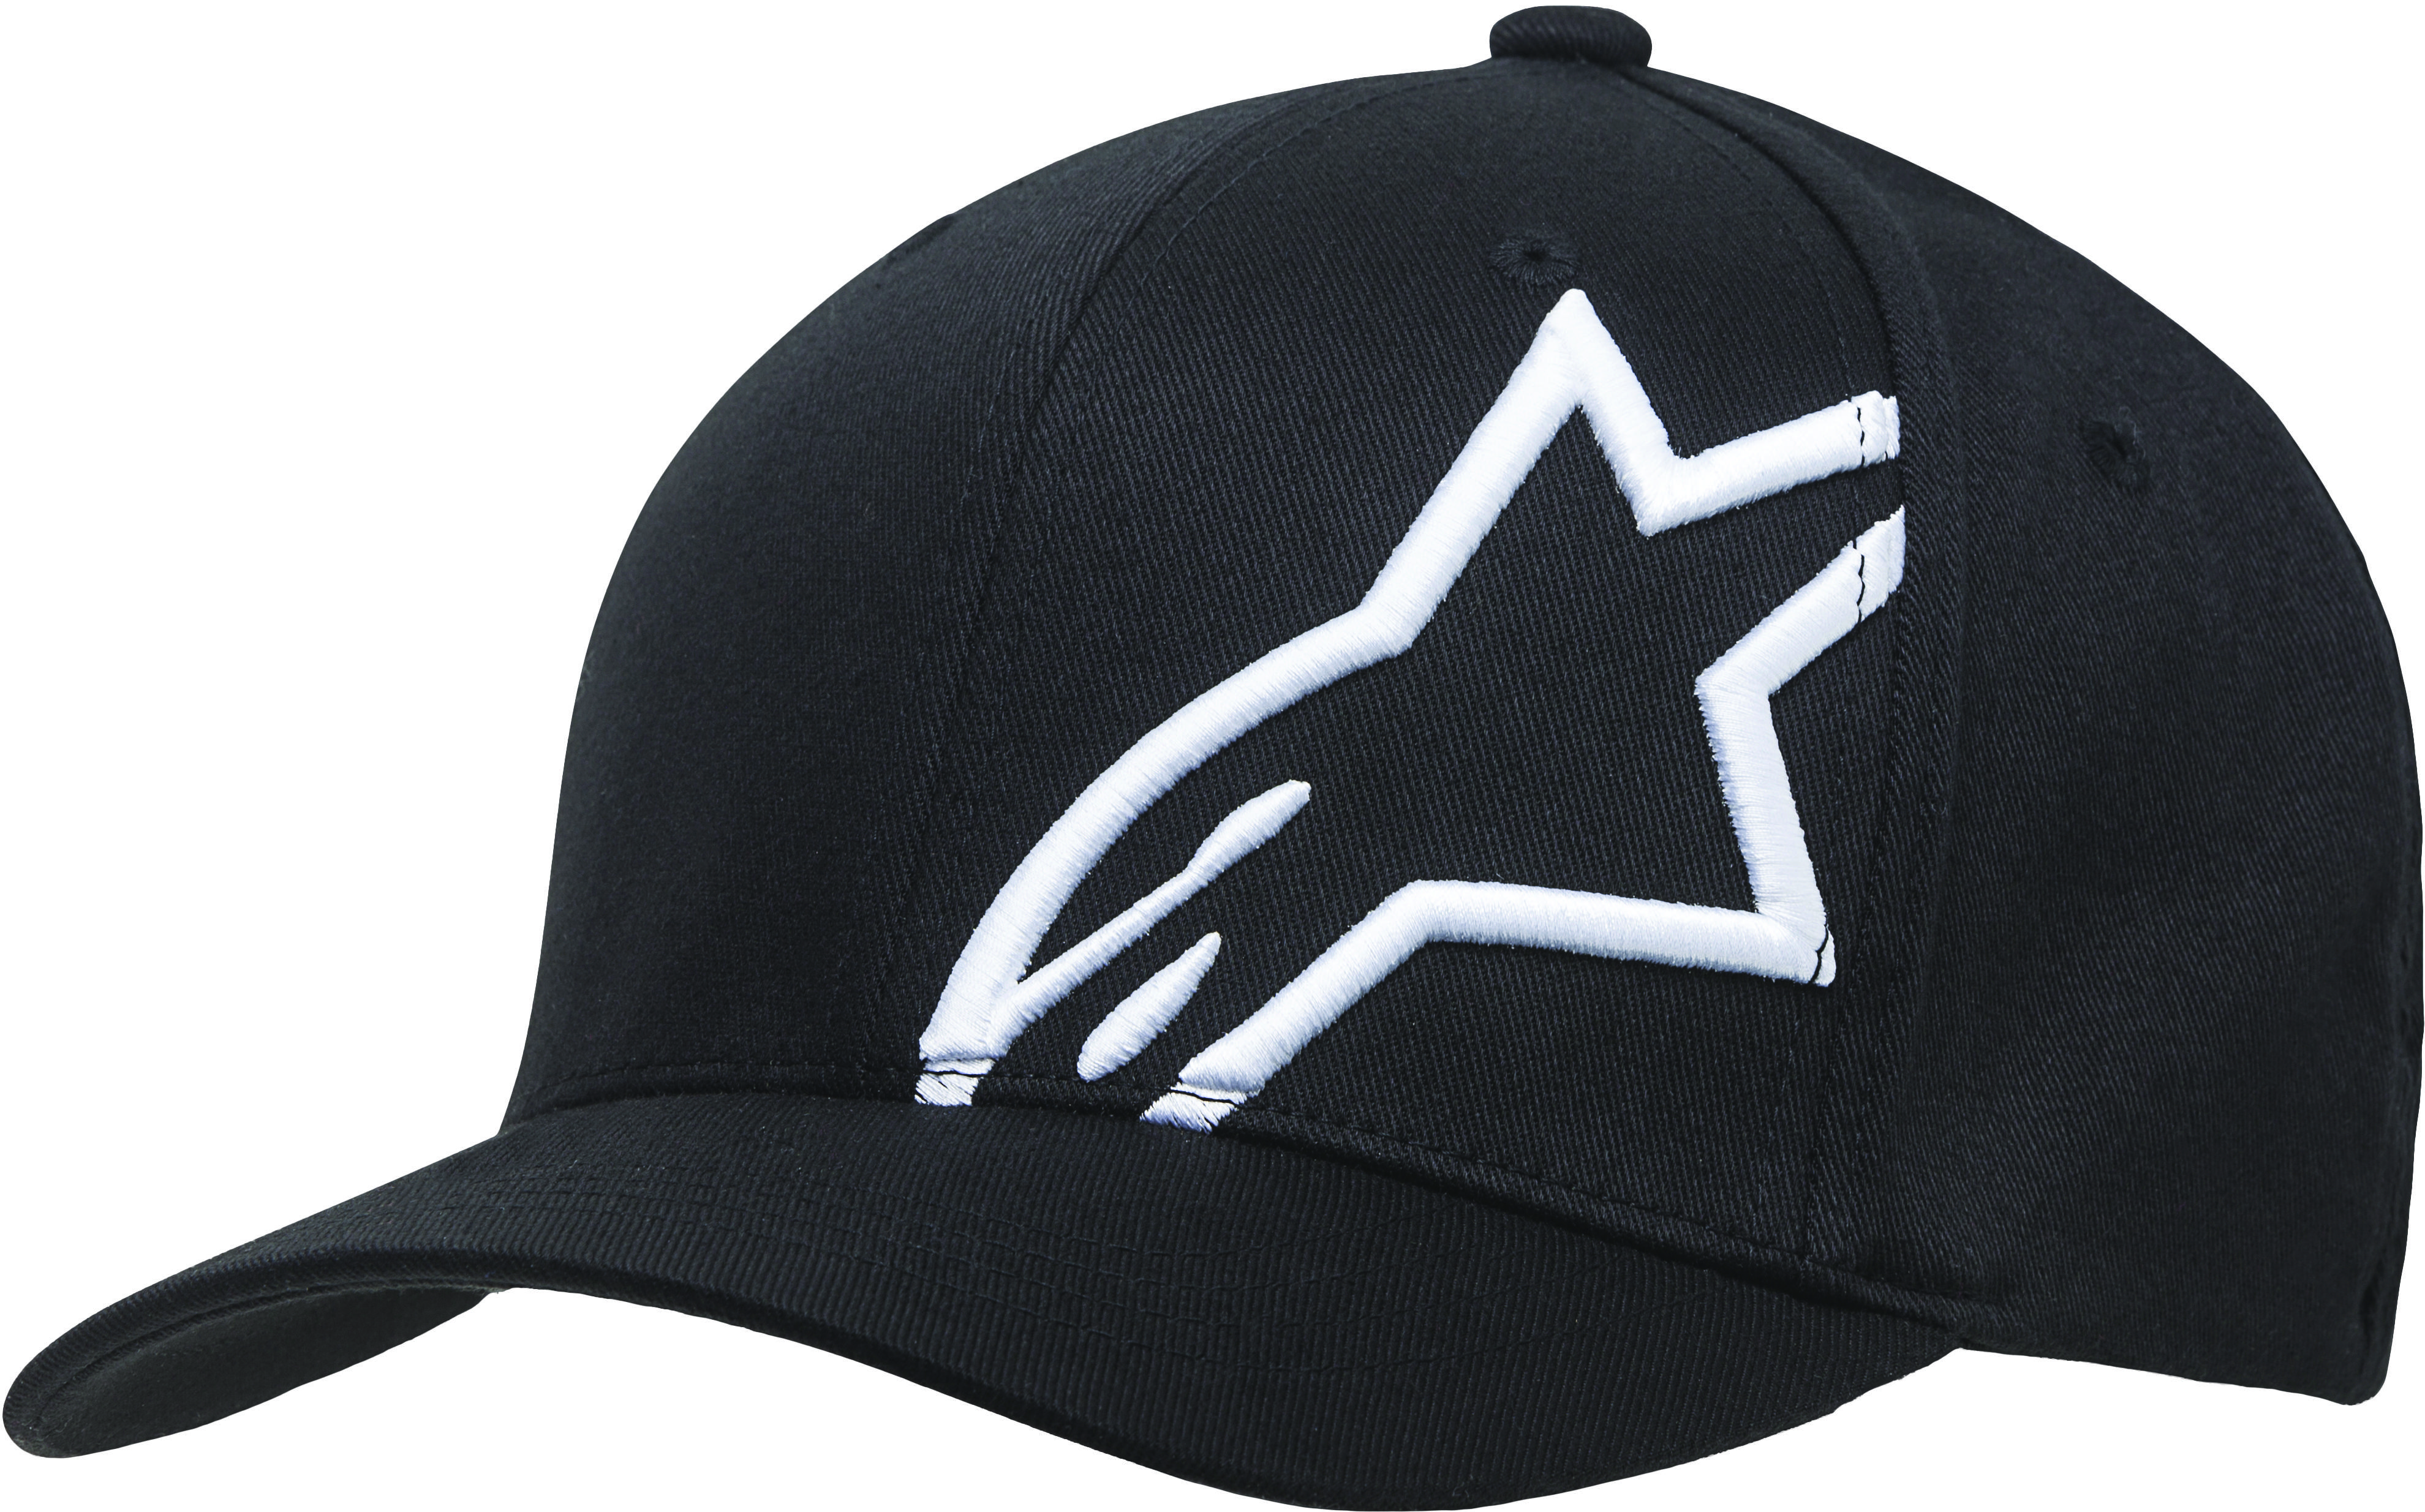 Corporate Shift 2 Curved Brim Hat Black/White Large/X-Large - Click Image to Close